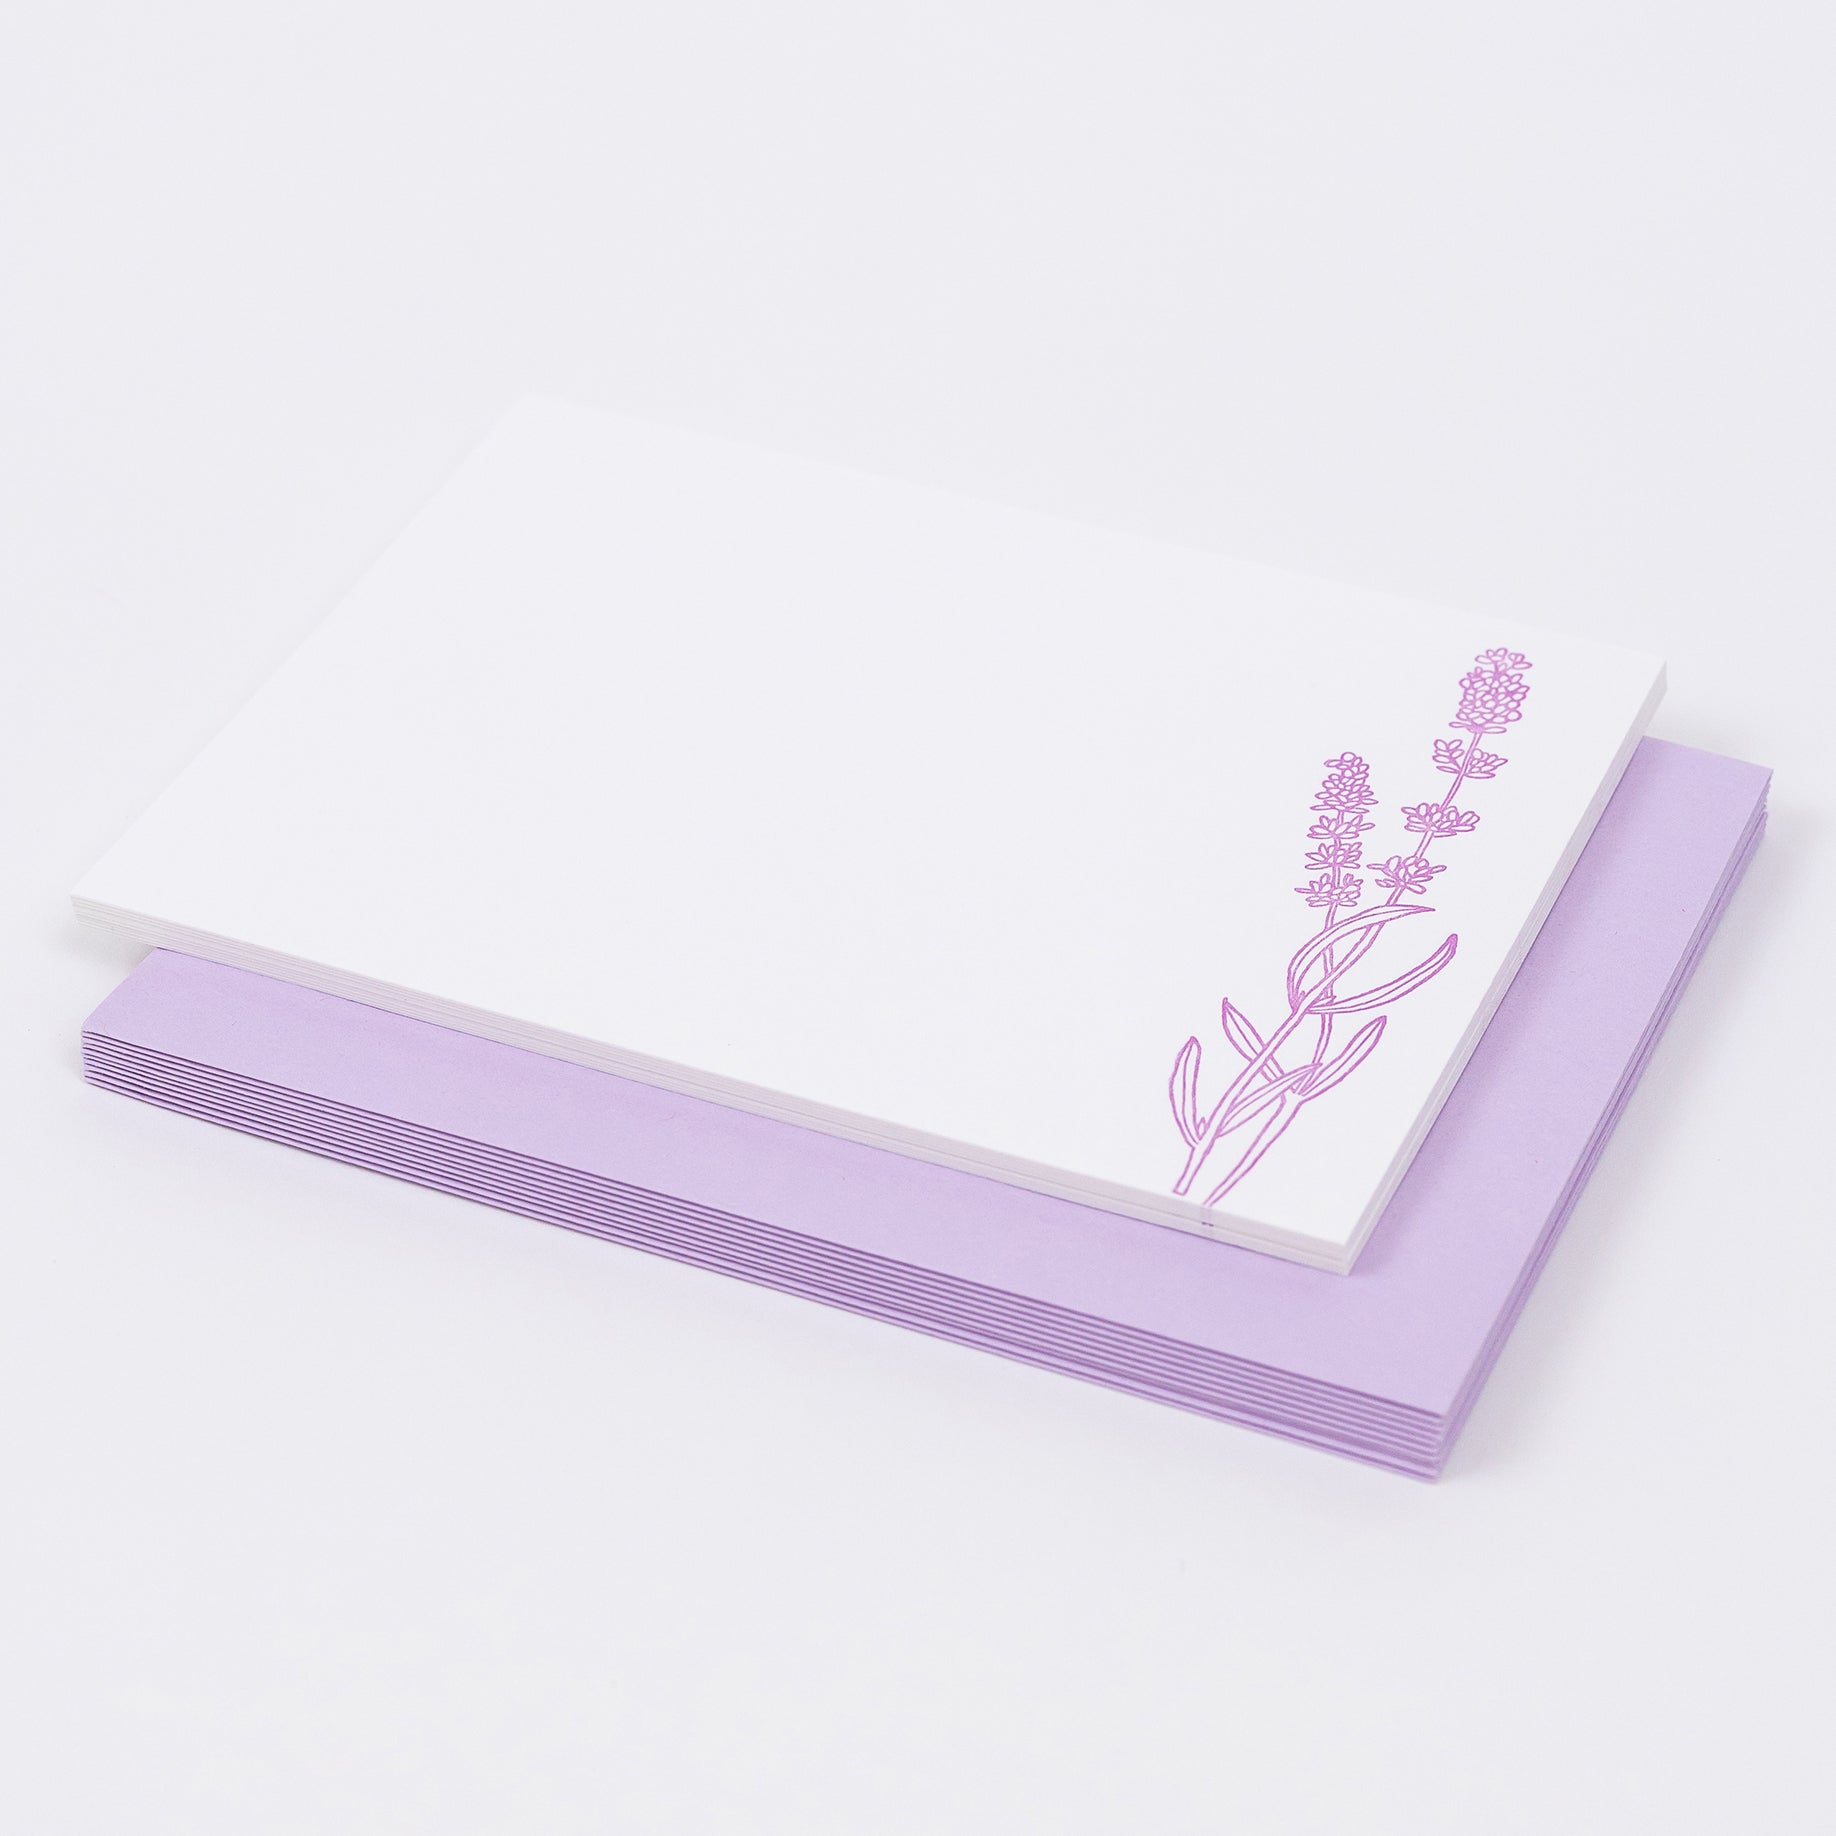 Set of 10 Letterpress Note Cards featuring a hand-drawn lavender sprigs, letterpress printed in a vibrant lavender ink onto 100% cotton paper. Includes 10 soft lavender envelopes. Size A6.  